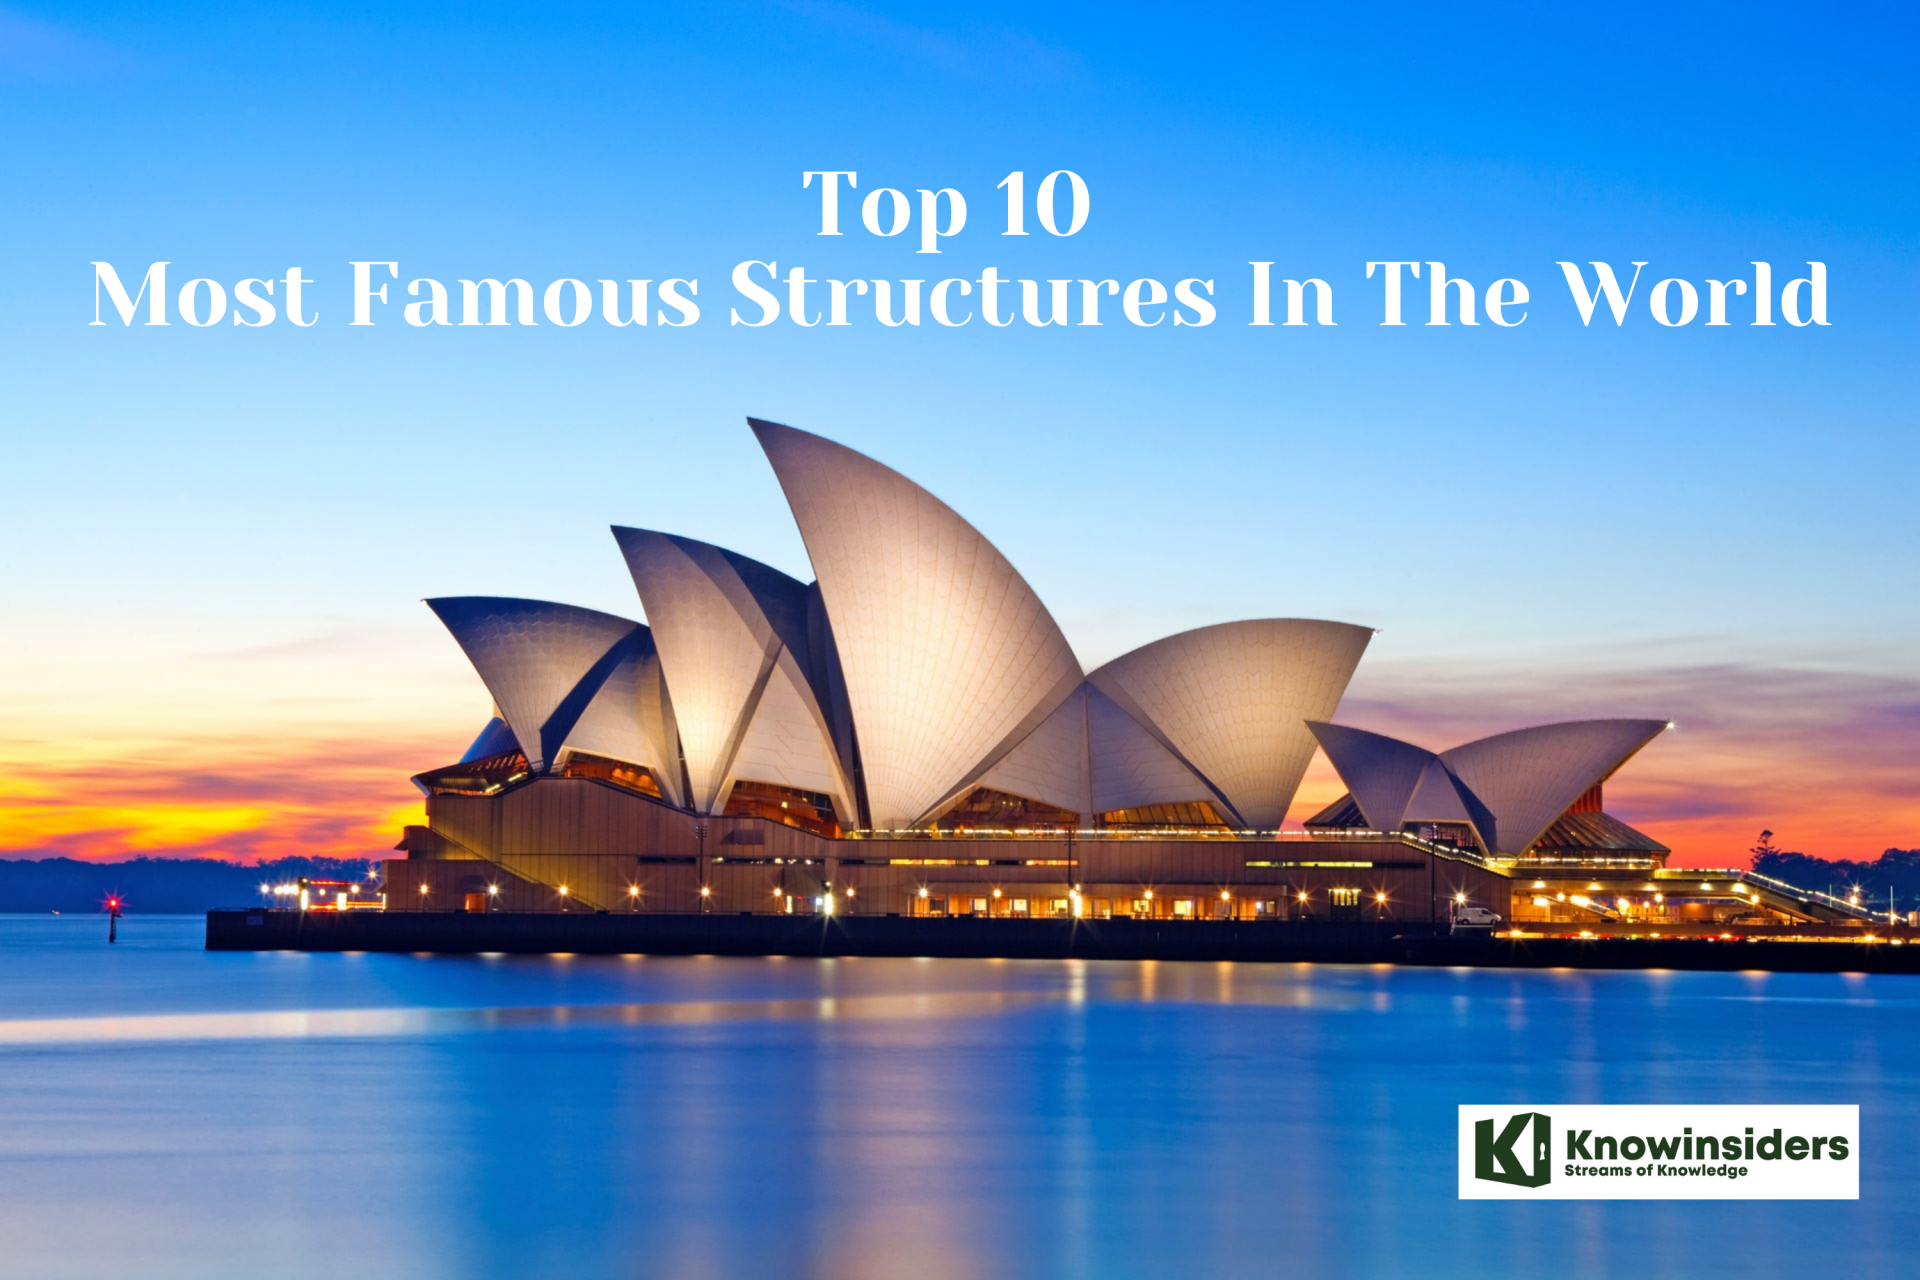 Top 10 Most Famous Structures In The World